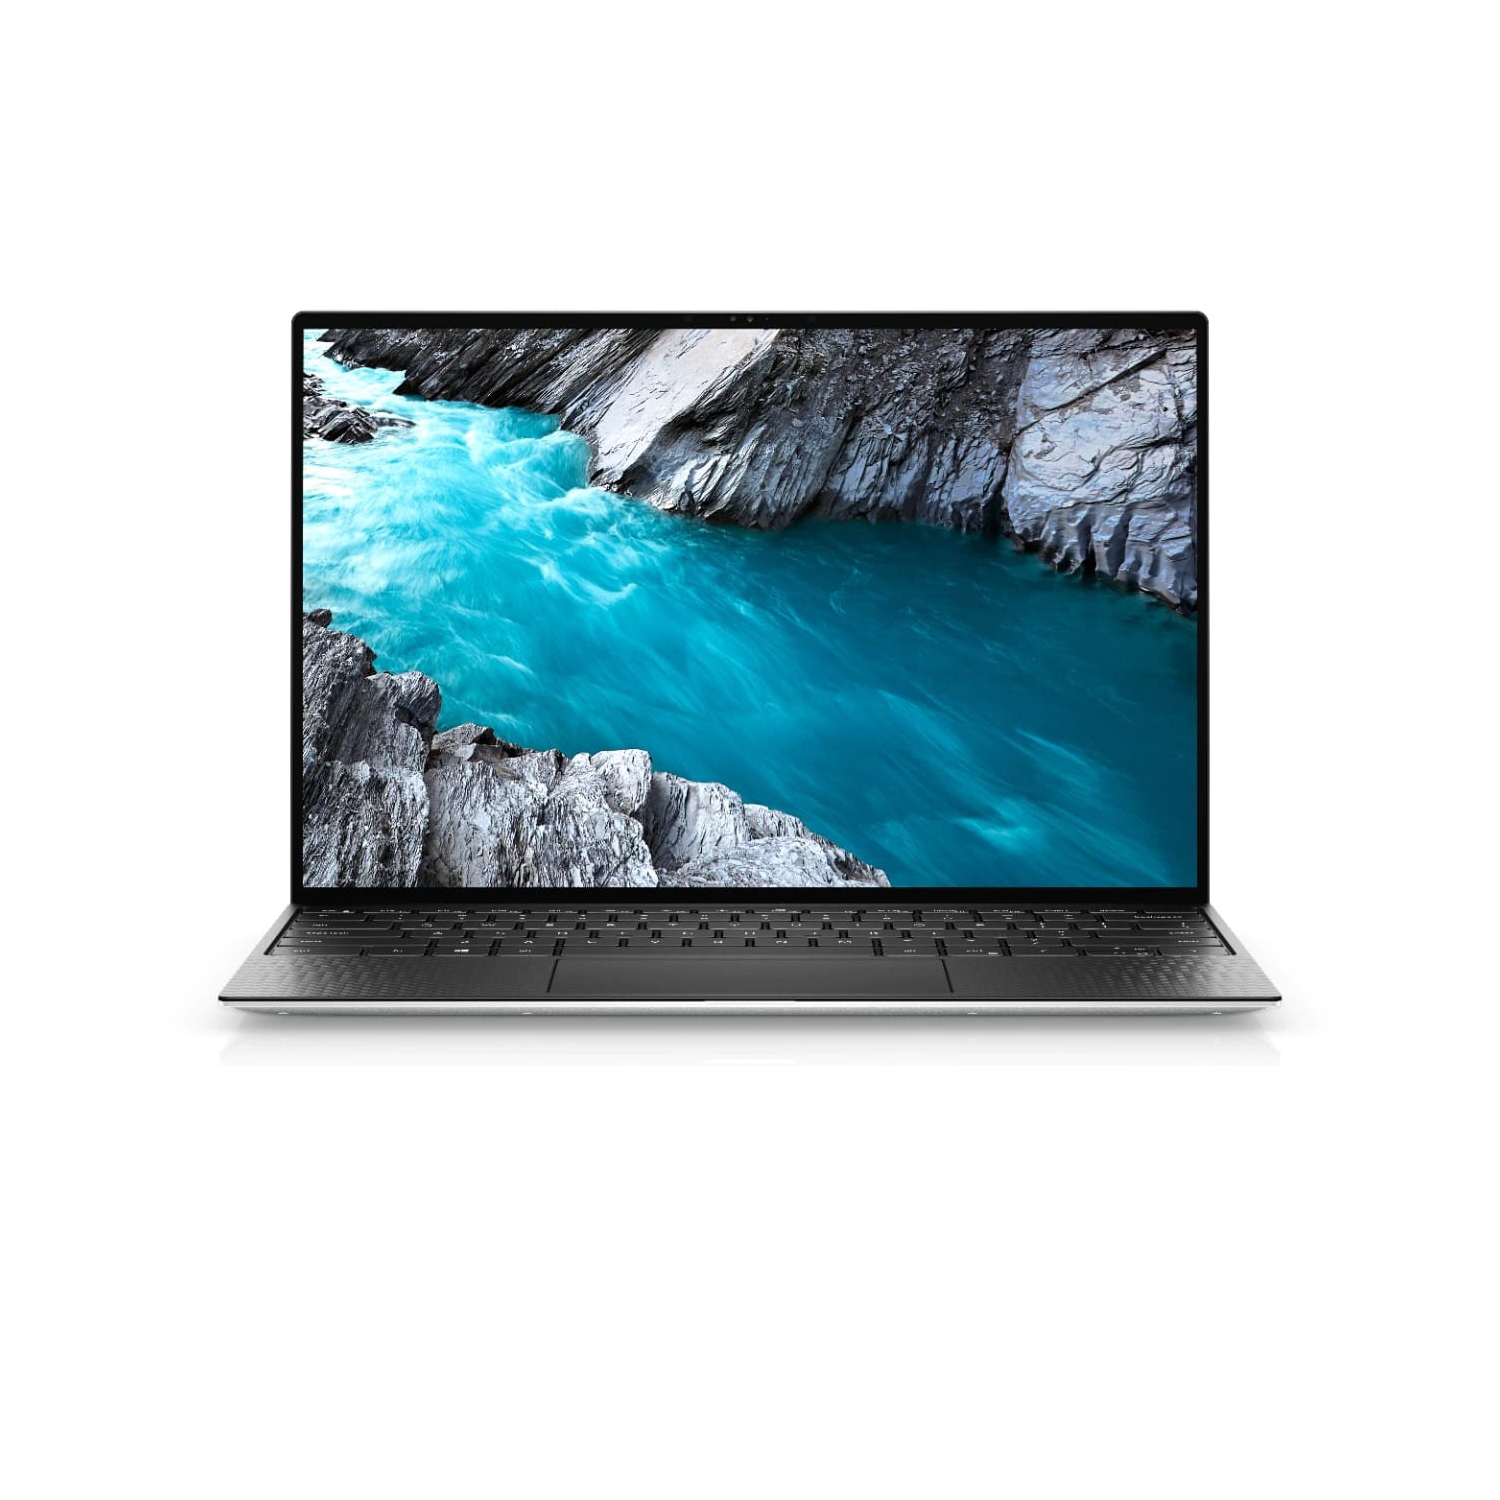 Refurbished (Excellent) - Dell XPS 13 9300 Laptop (2020) | 13.3" FHD+ Touch | Core i5 - 256GB SSD - 16GB RAM | 4 Cores @ 3.6 GHz - 10th Gen CPU Certified Refurbished